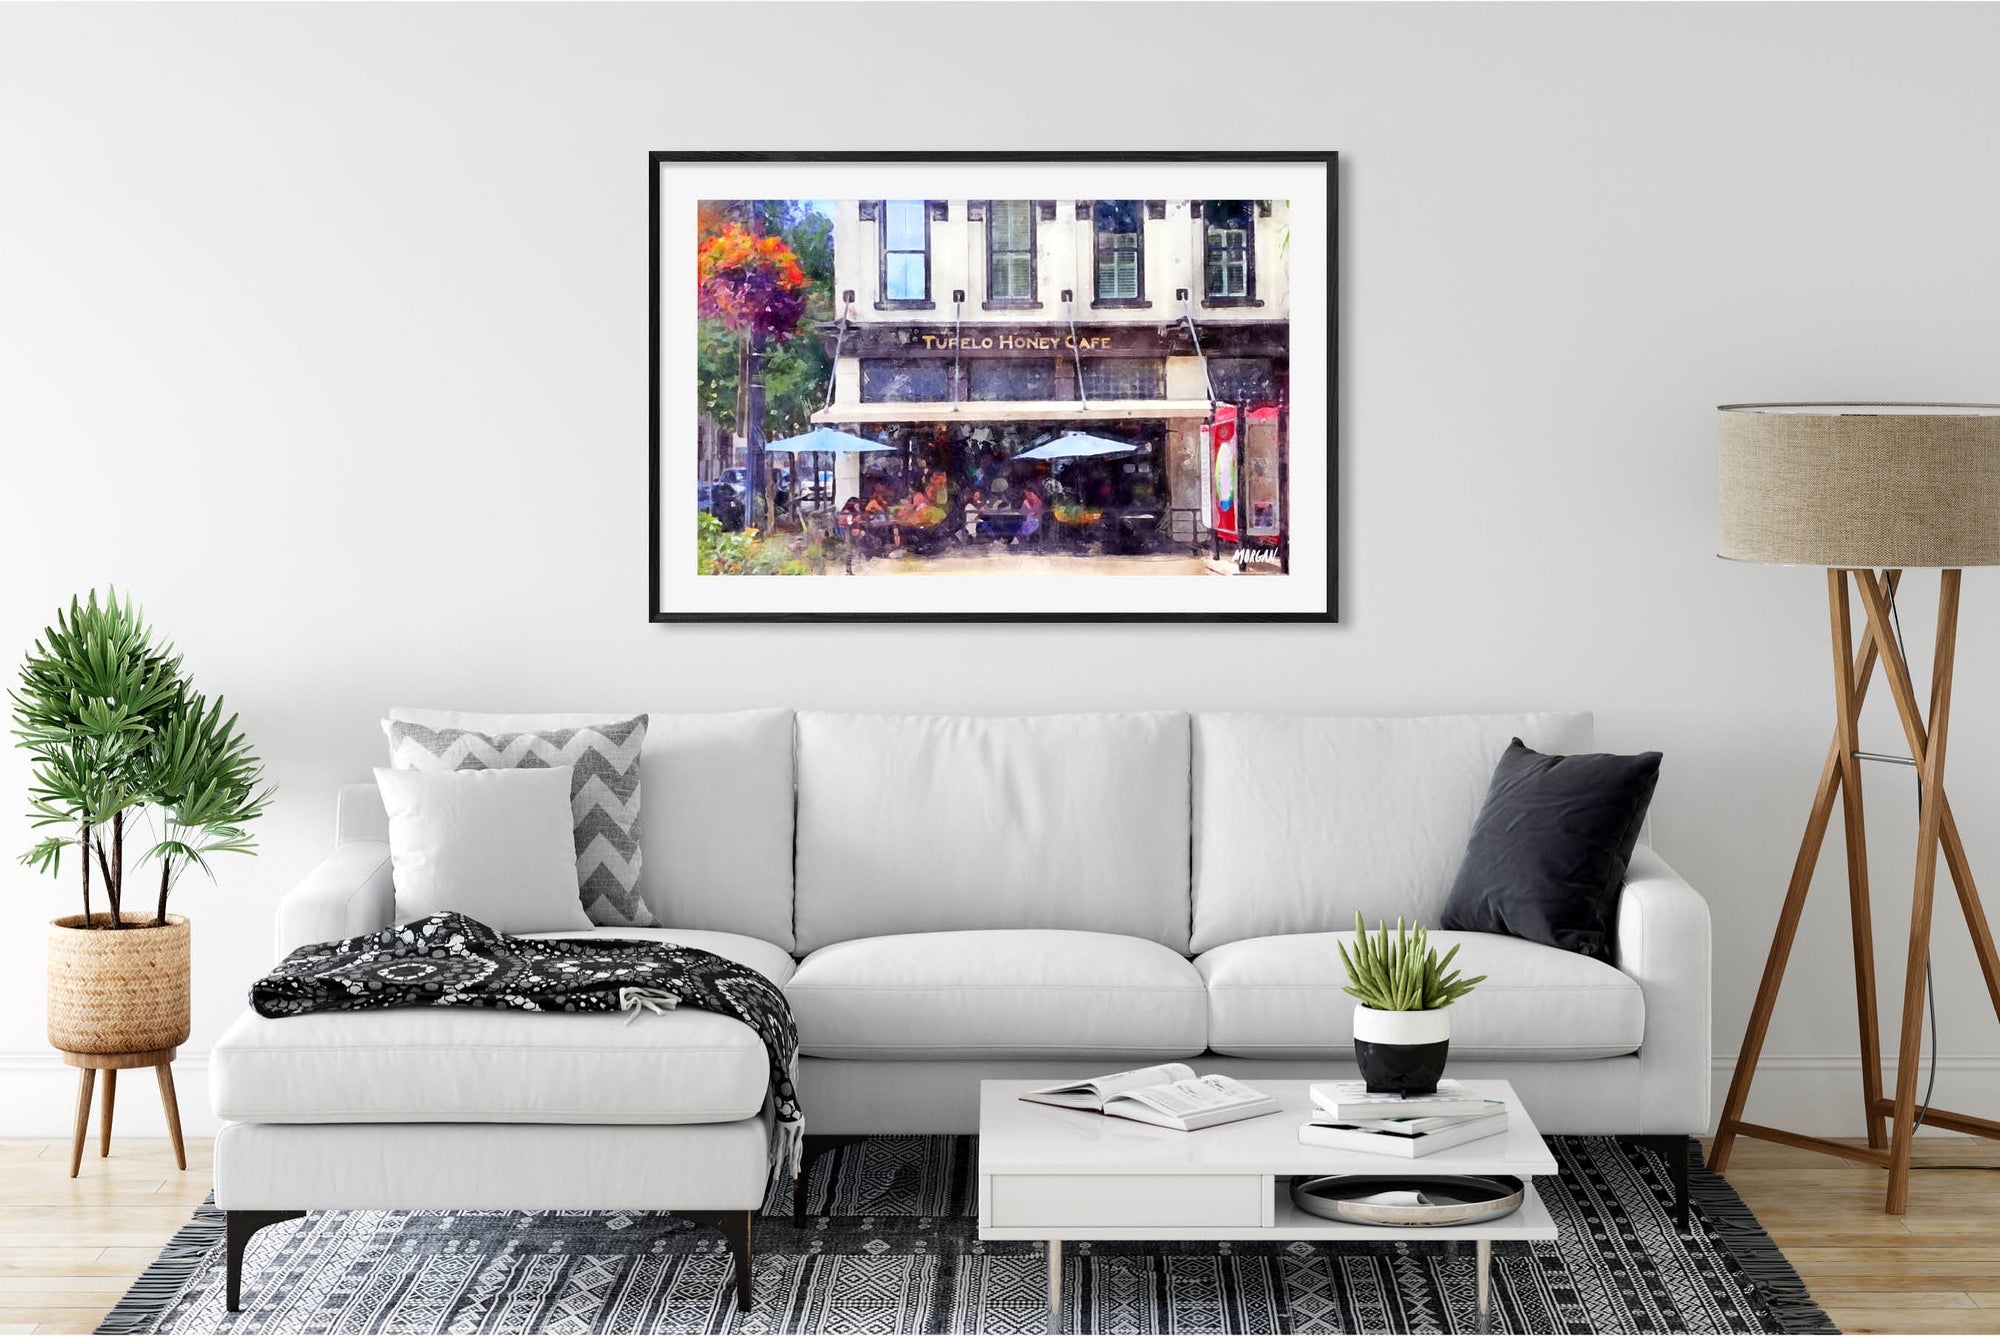 Tupelo Honey Cafe - Knoxville Art Print in Room